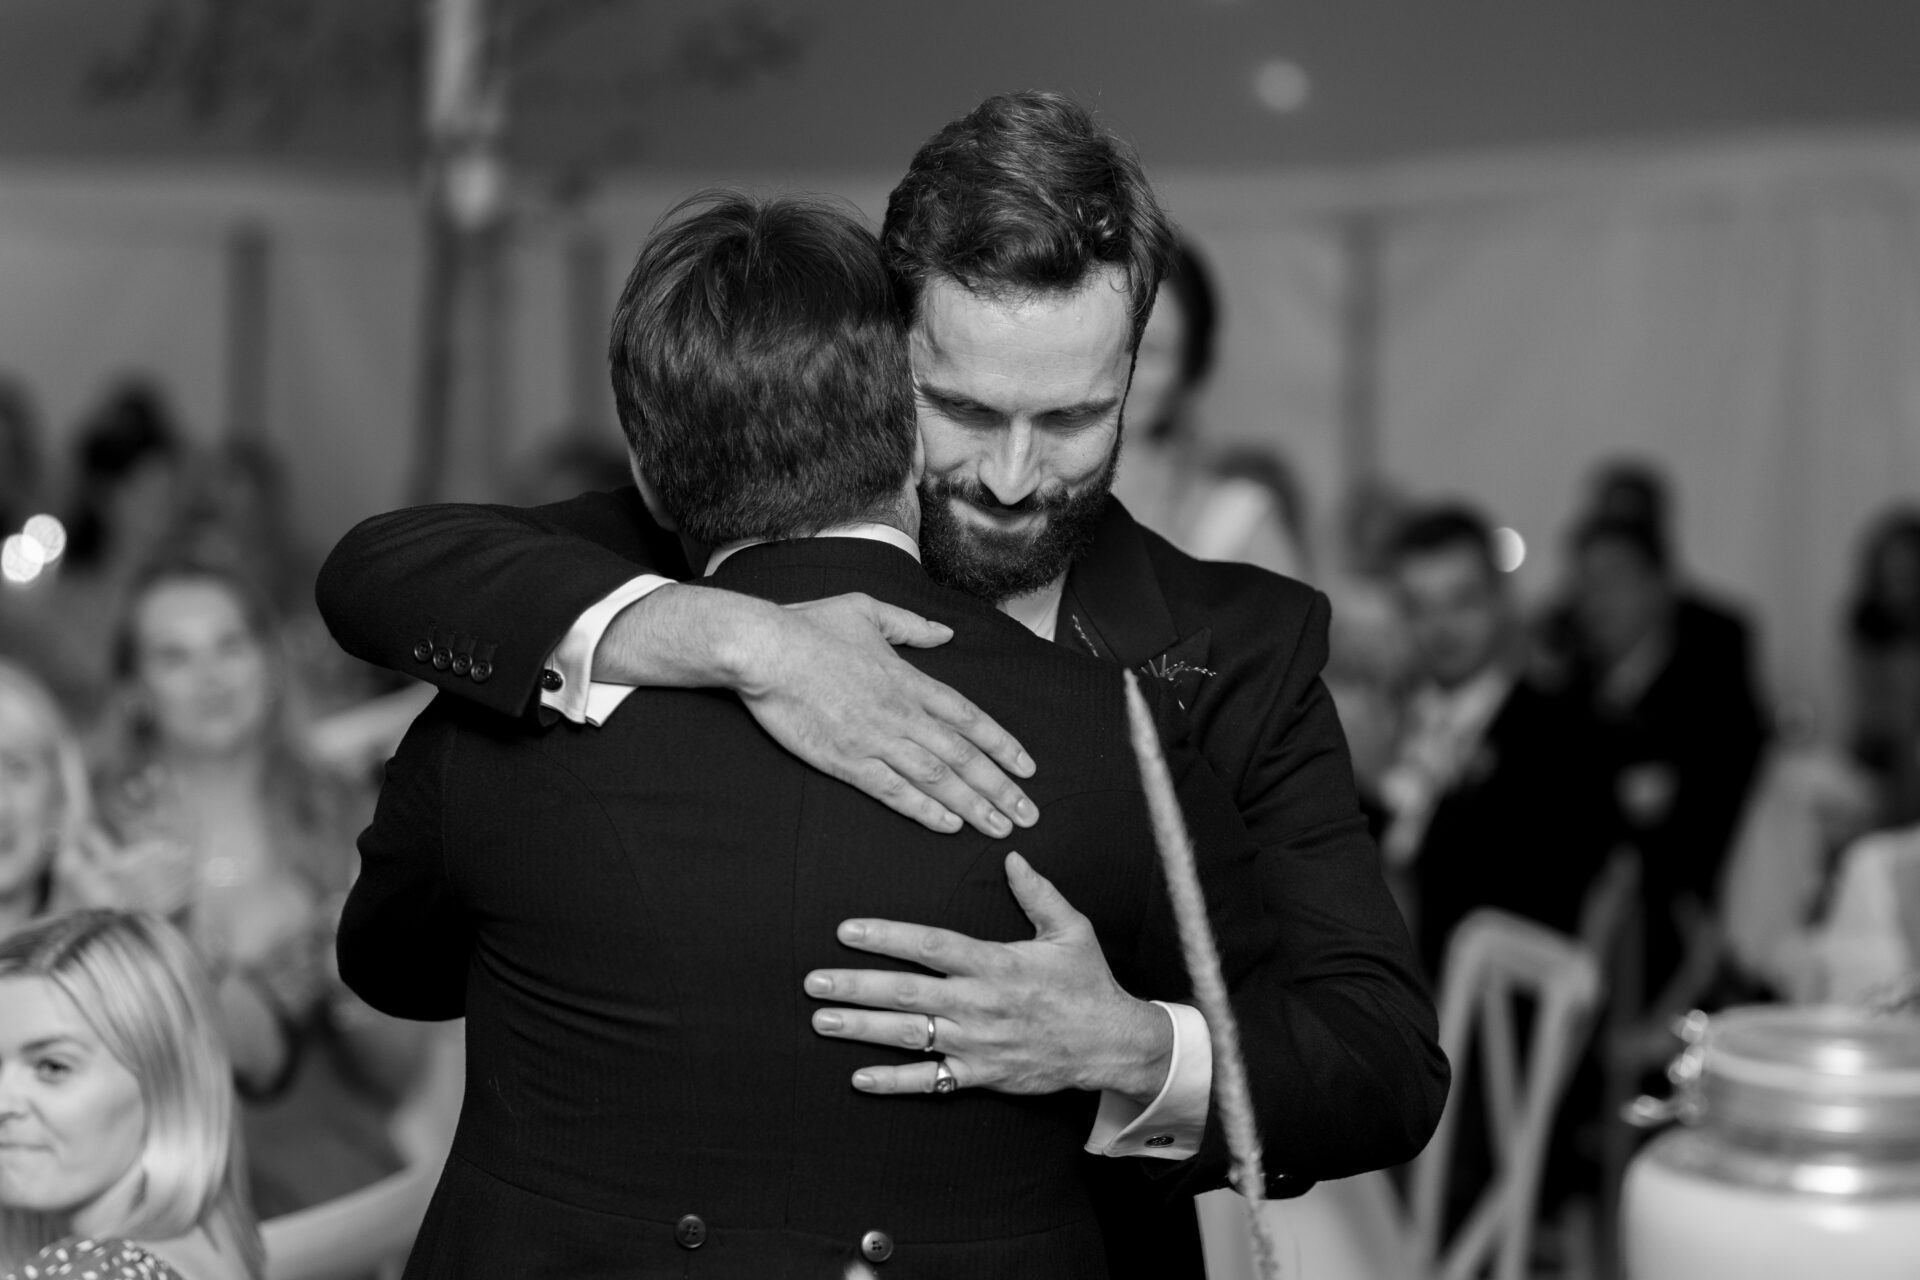 The groom embraces a friend during his Somerset marquee wedding